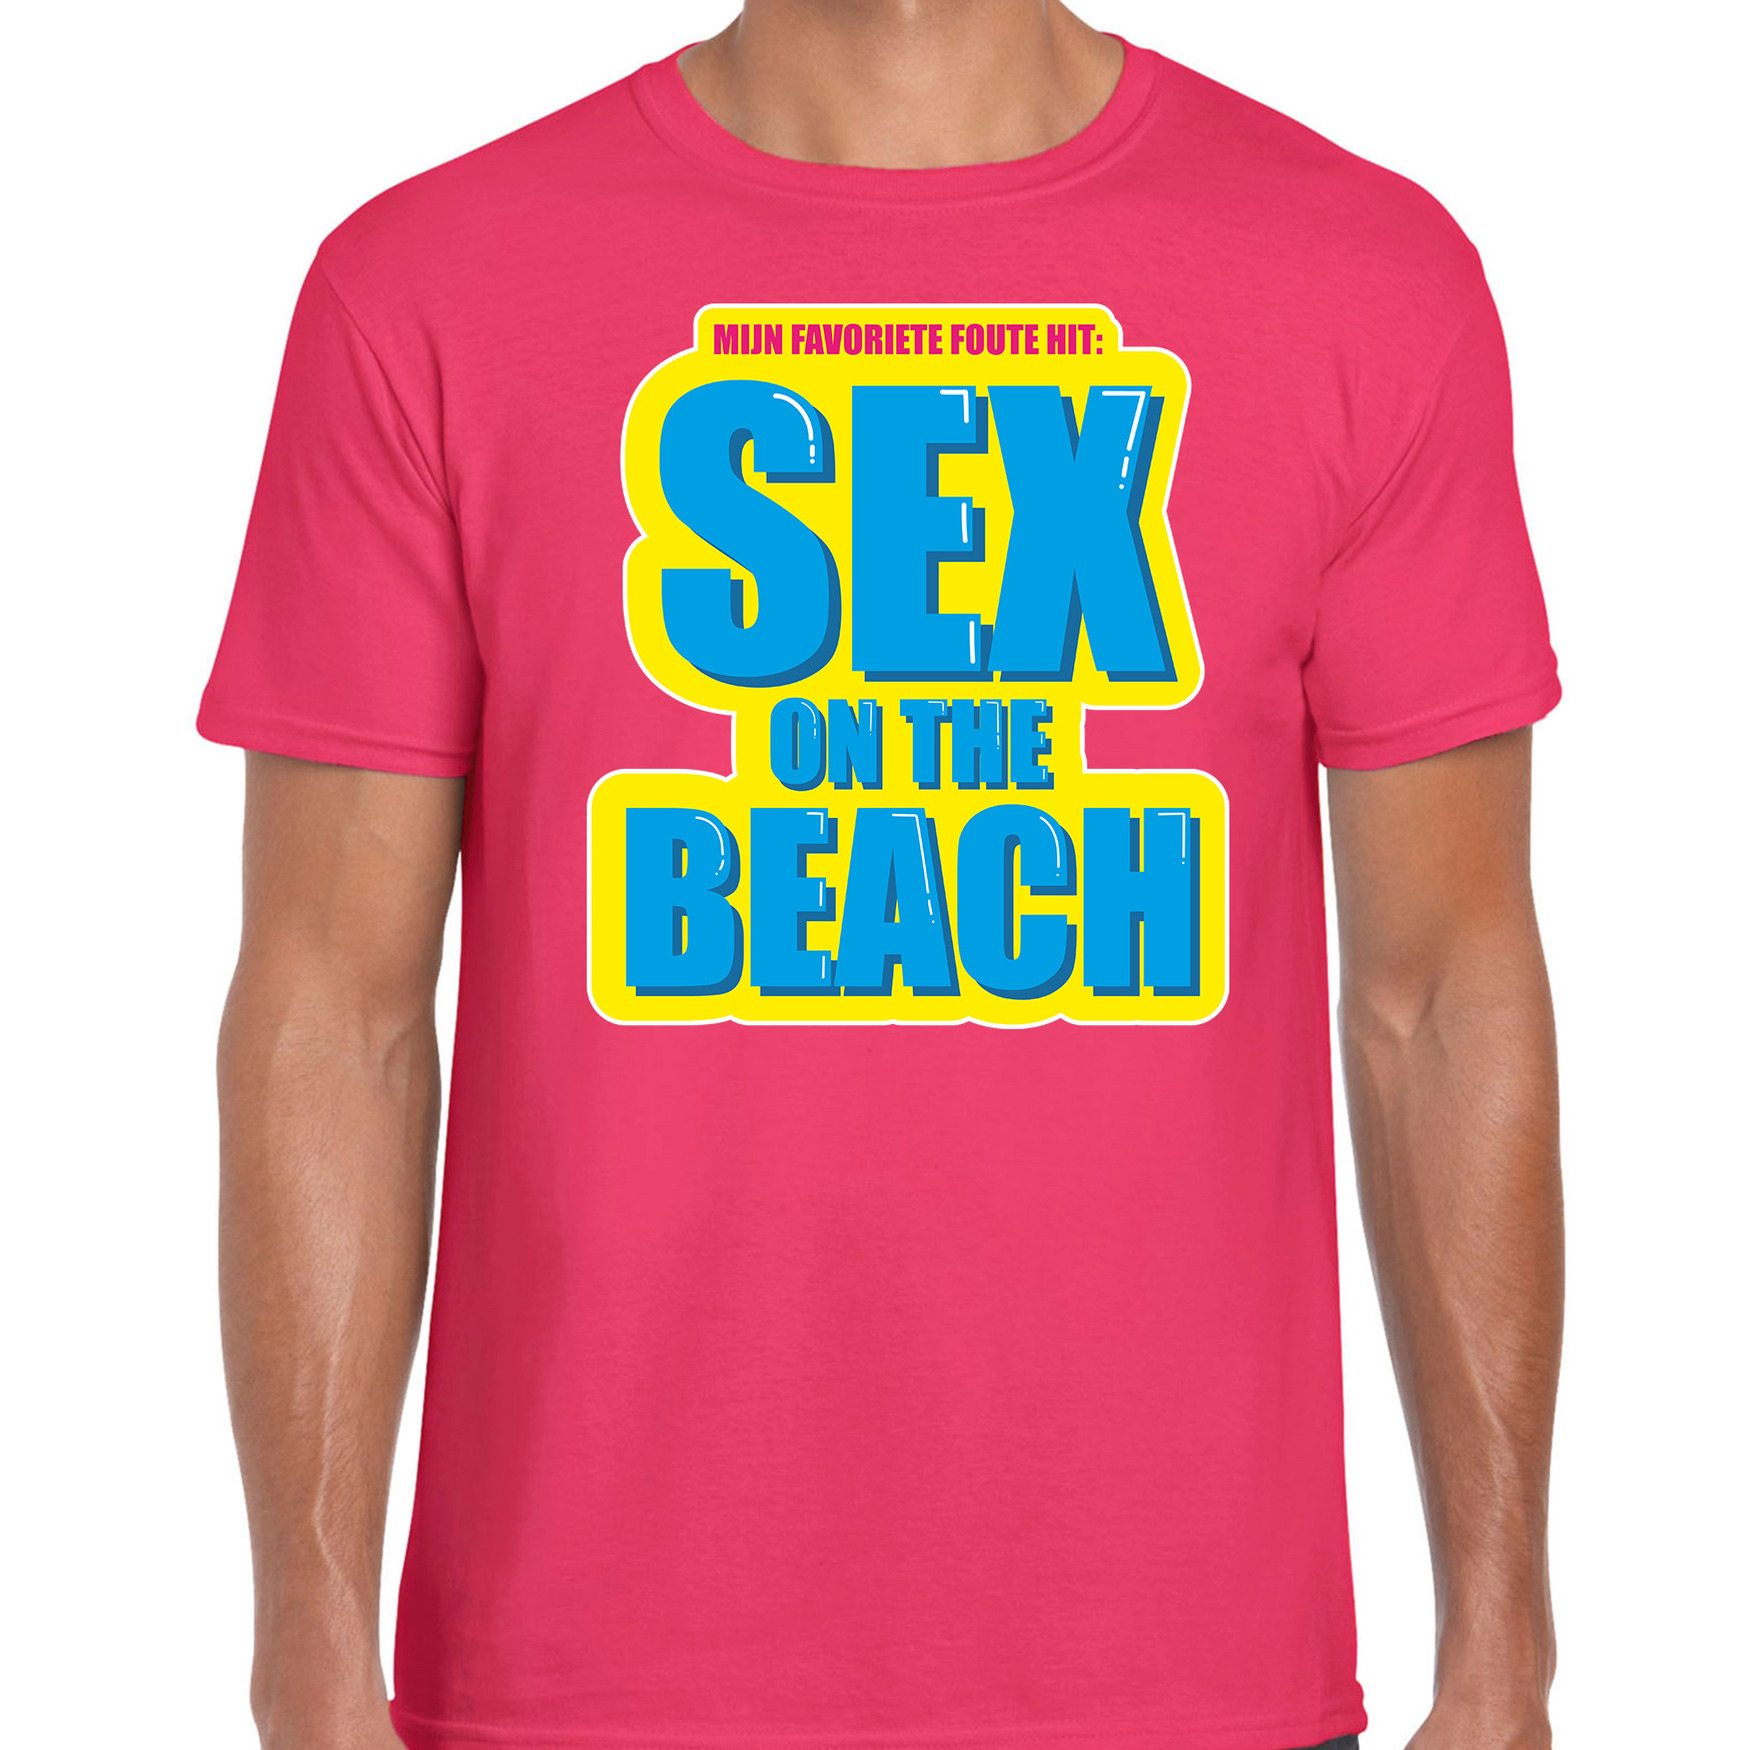 Foute party Sex on the beach verkleed t-shirt roze heren Foute party hits outfit- kleding